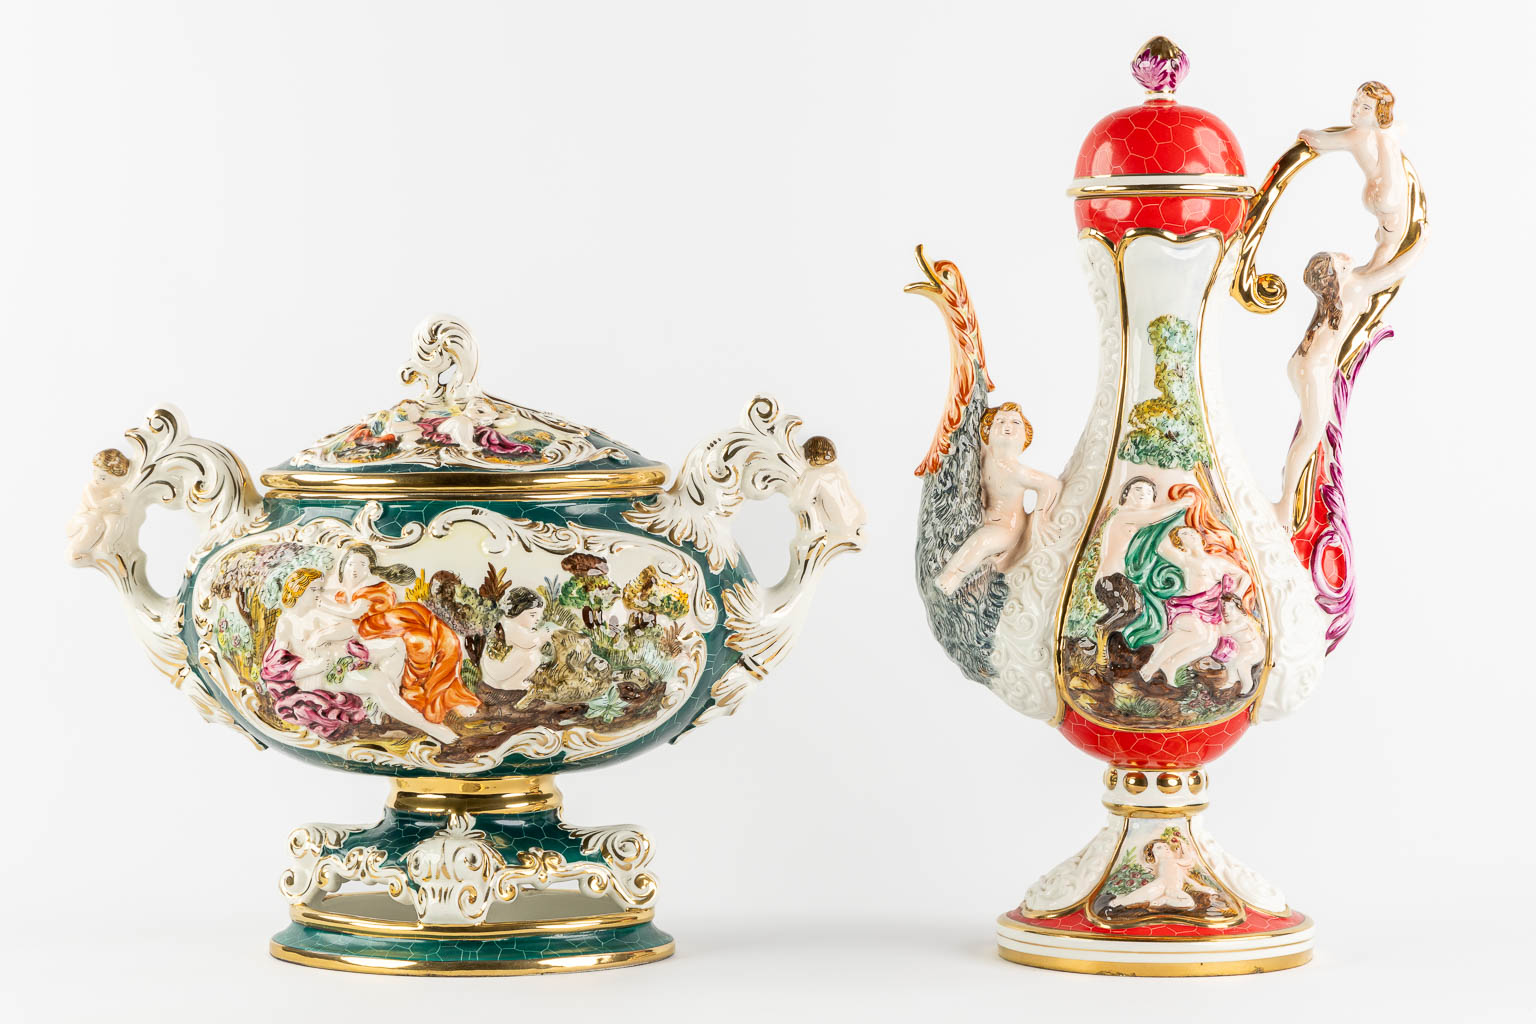 Two vases and a plate, glazed faience, Capodimonte, Italy. (L:21 x W:30 x H:54 cm)